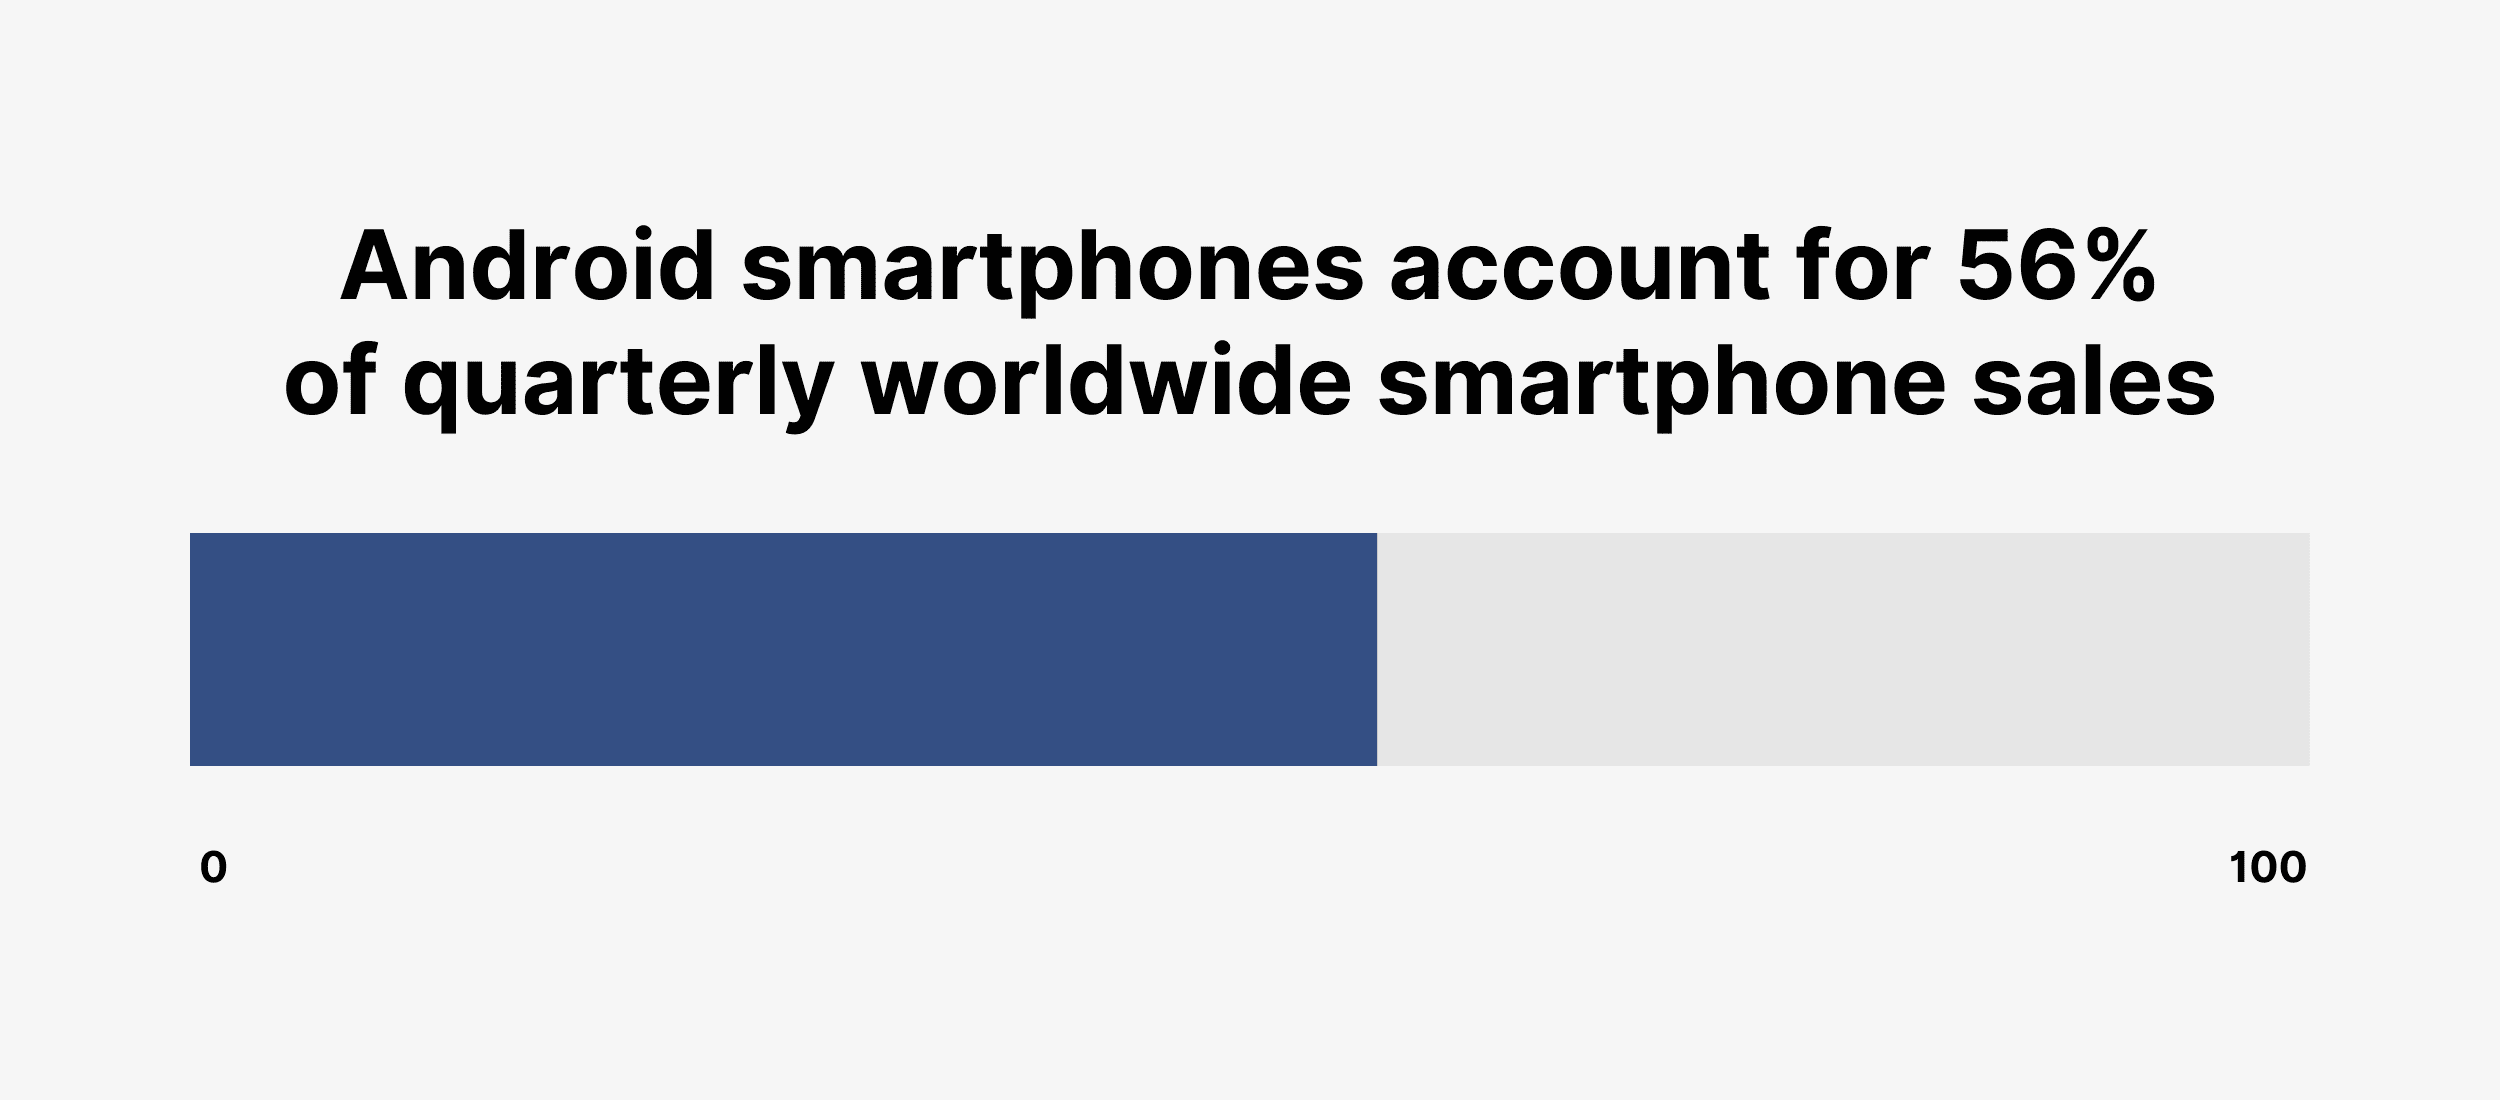 Android smartphones account for 56% of quarterly worldwide smartphone sales